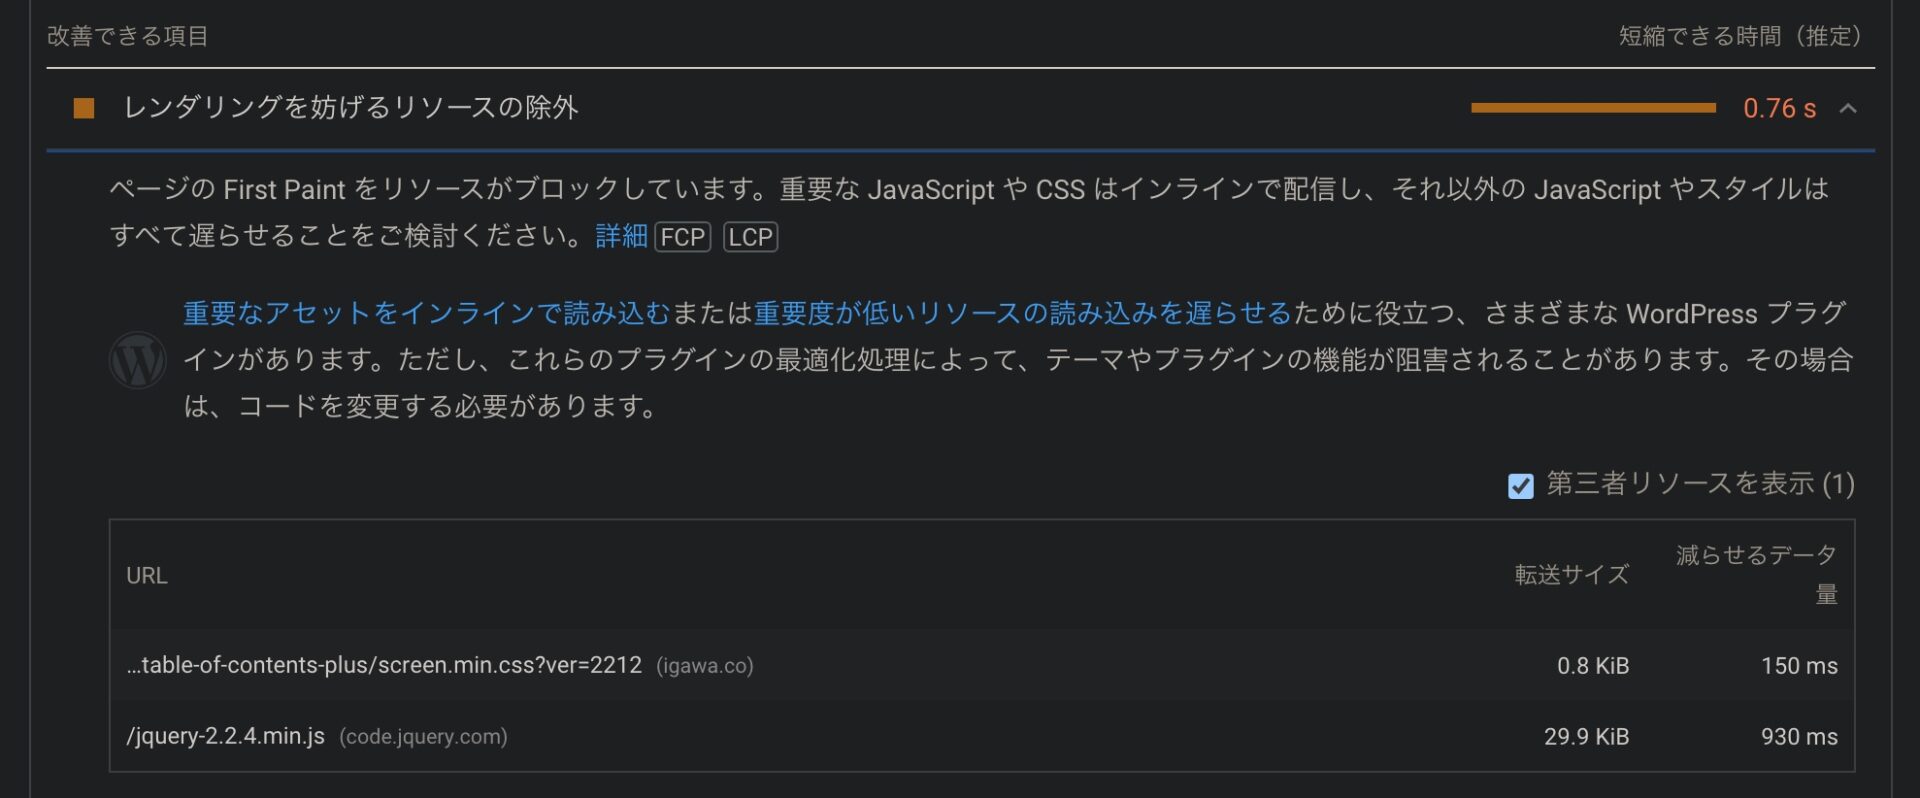 PageSpeed Insightsの測定結果。